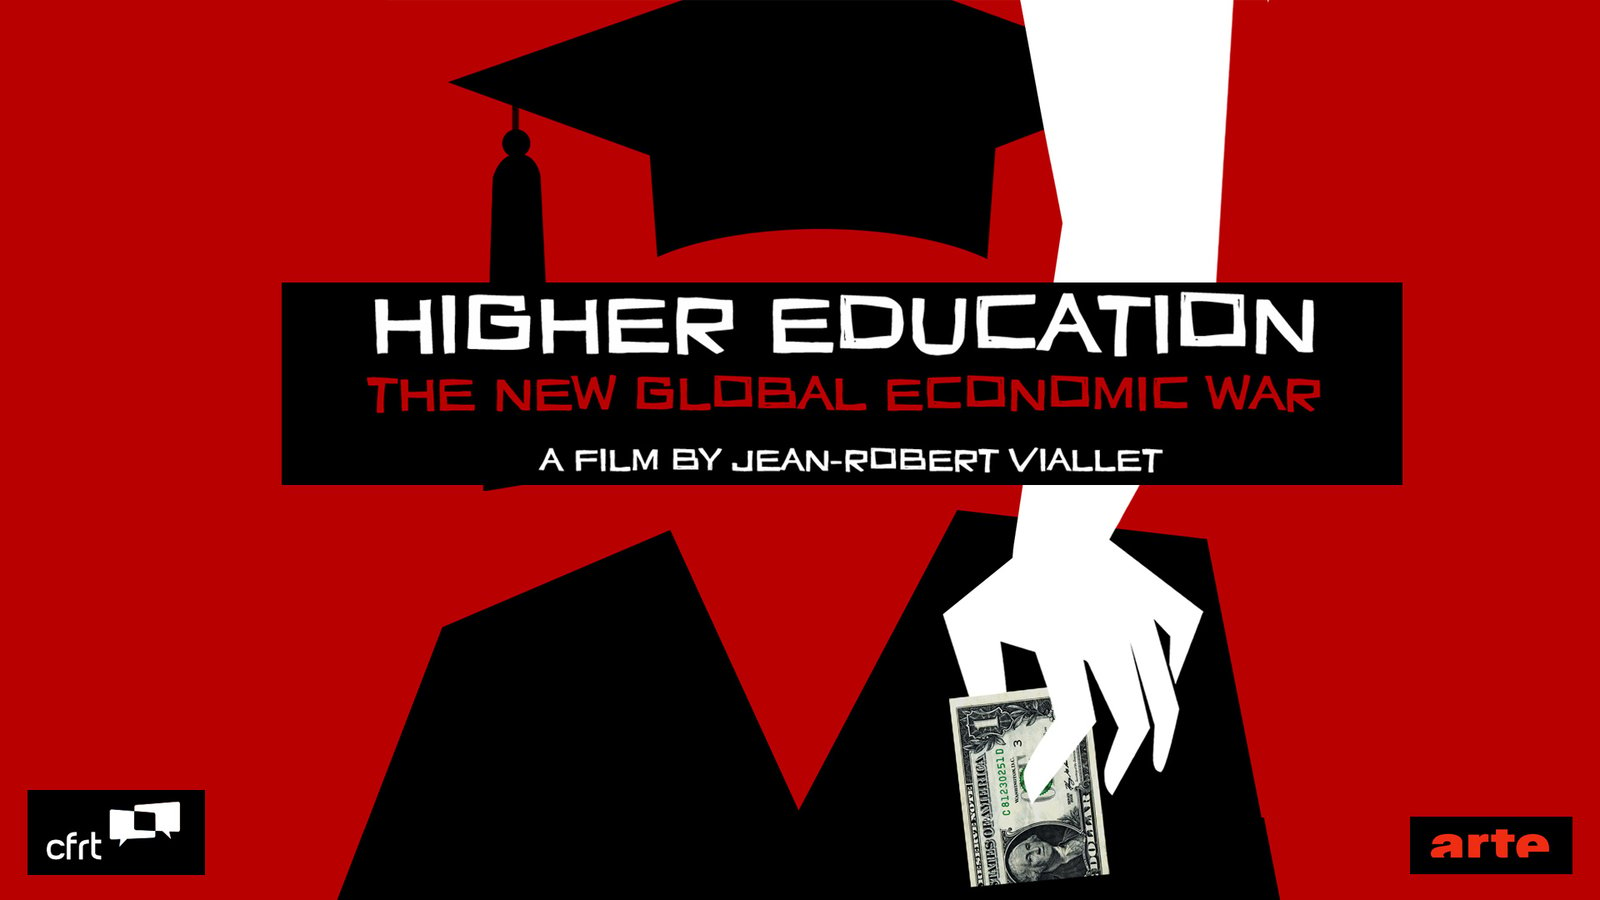 Higher Education - The New Global Economic War